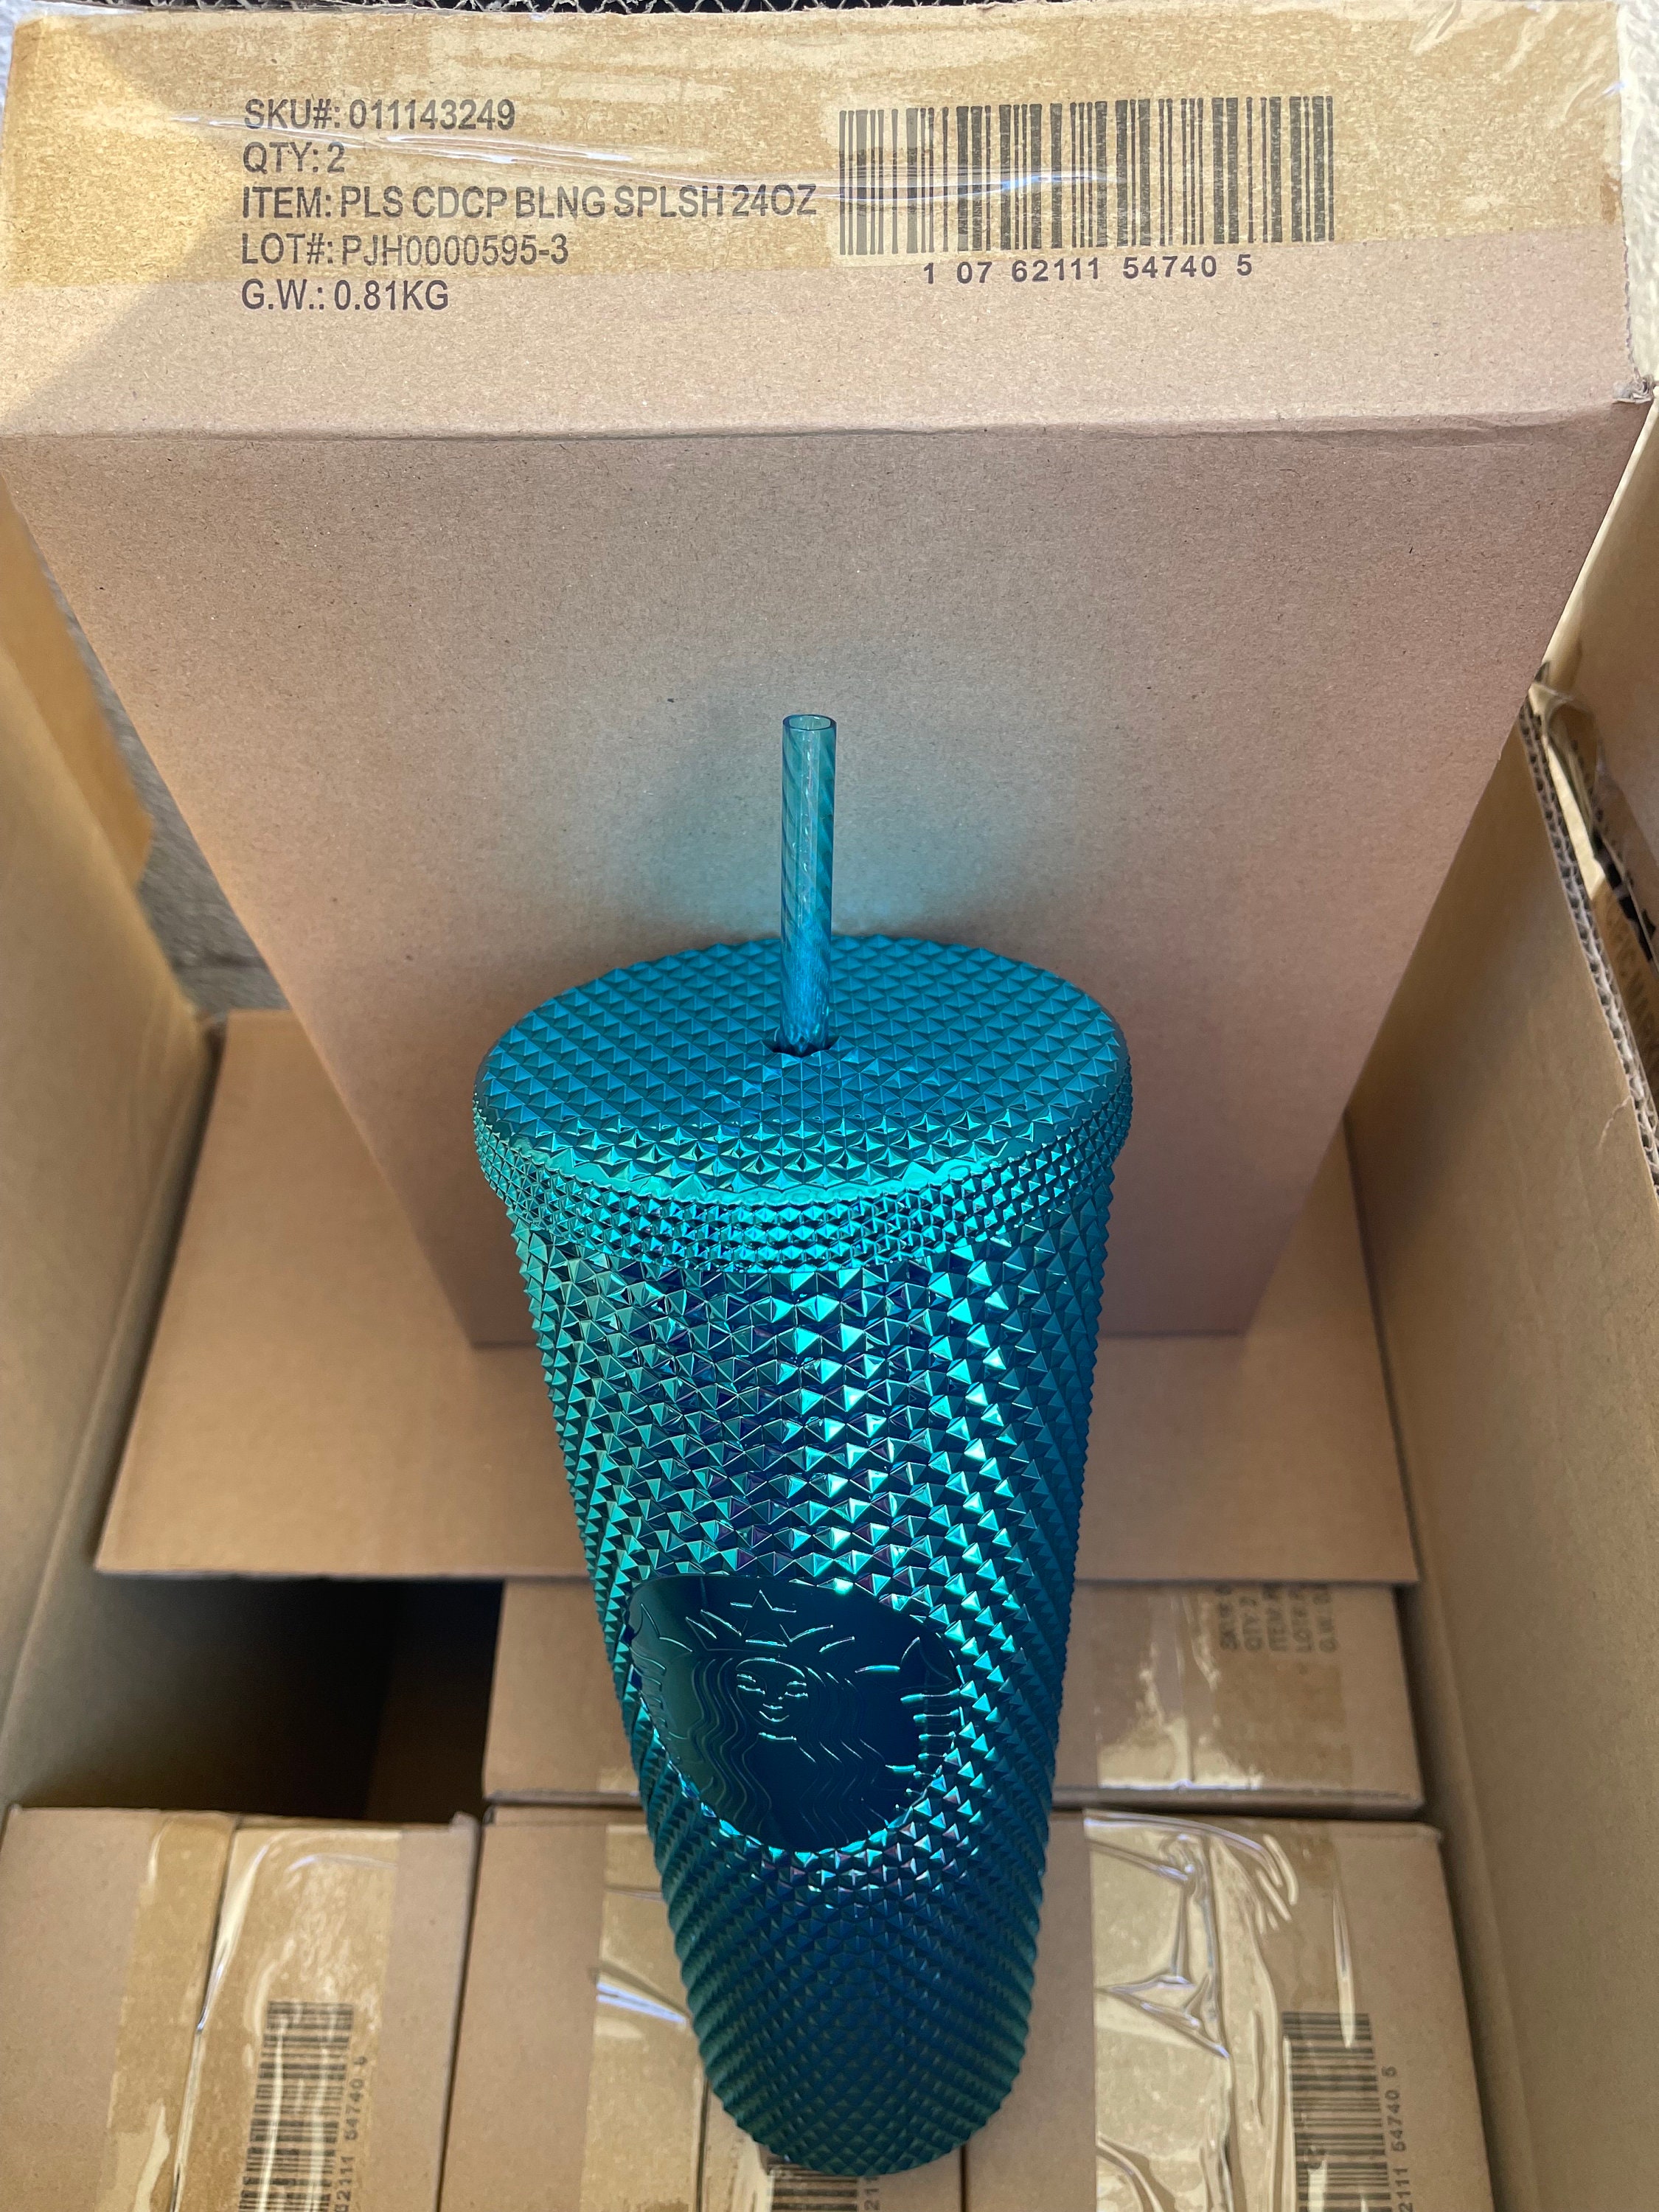 Starbucks Studded Tumbler Venti Cold Cup Blue Soft Touch Mexico Summer  Limited